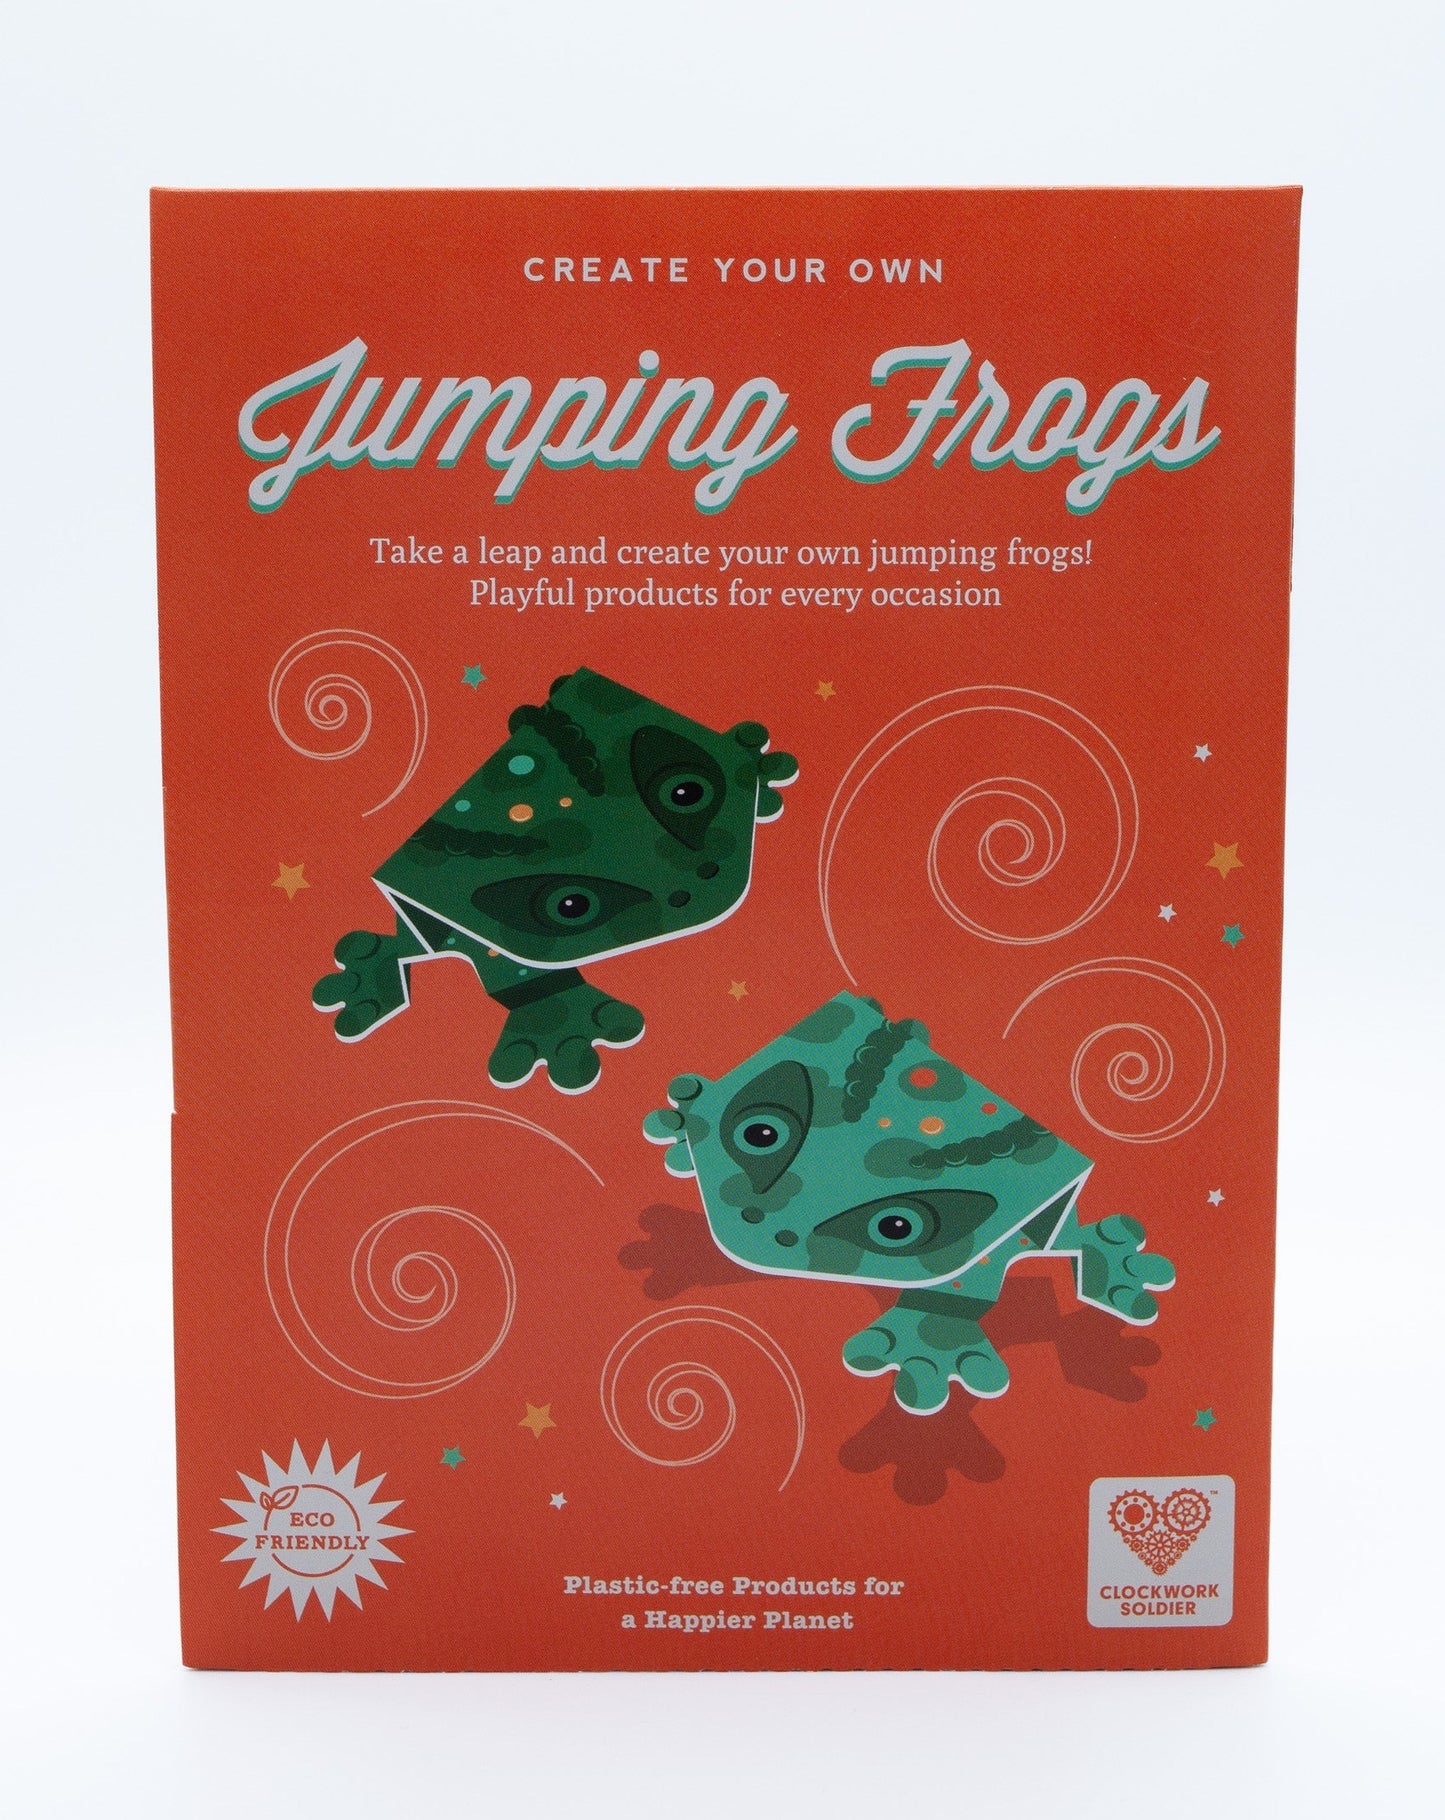 Clockwork Soldier-Create Your Own Jumping Frogs